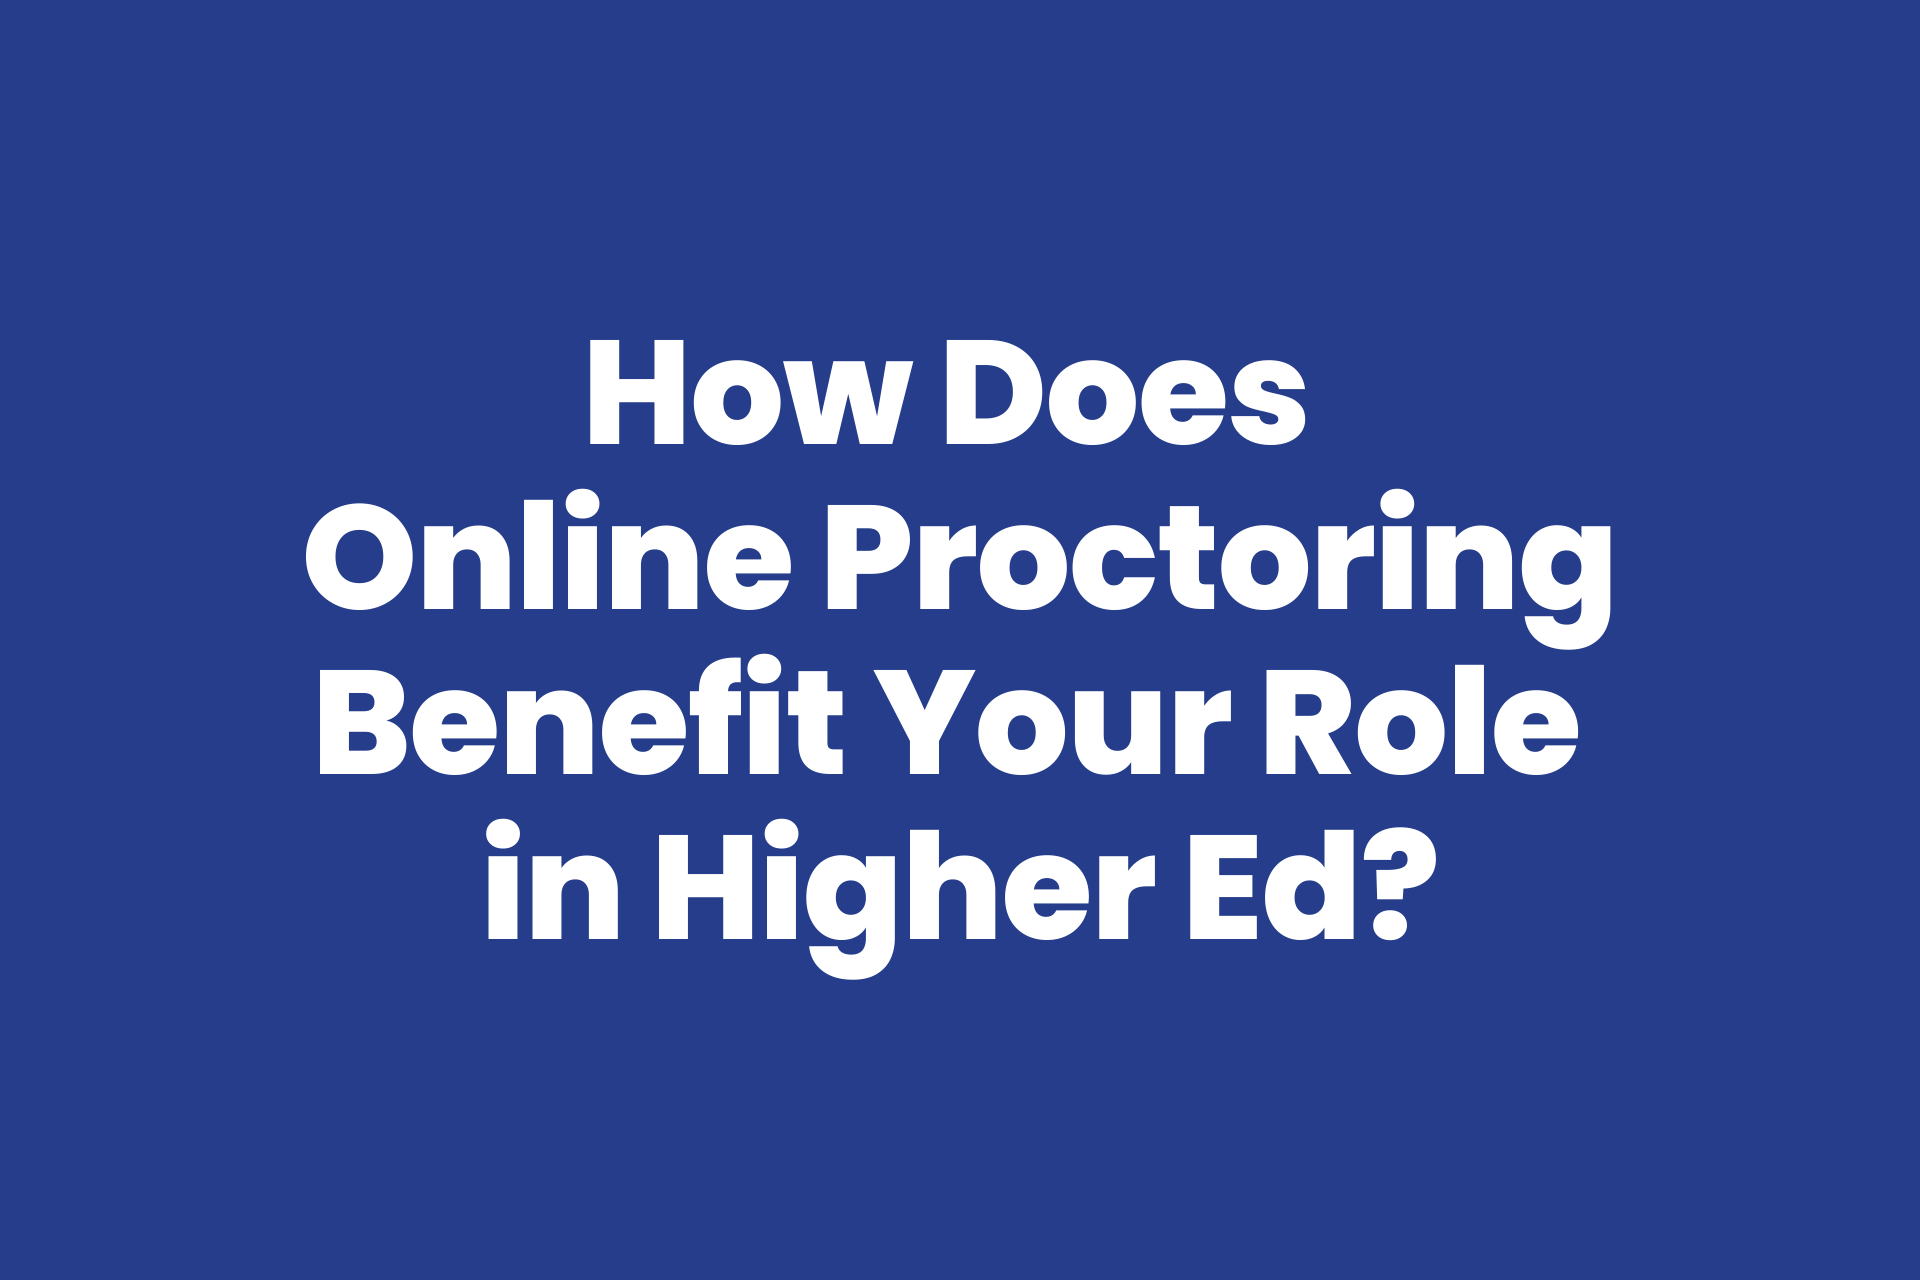 How online proctoring helps improve teaching and learning for different roles in higher education